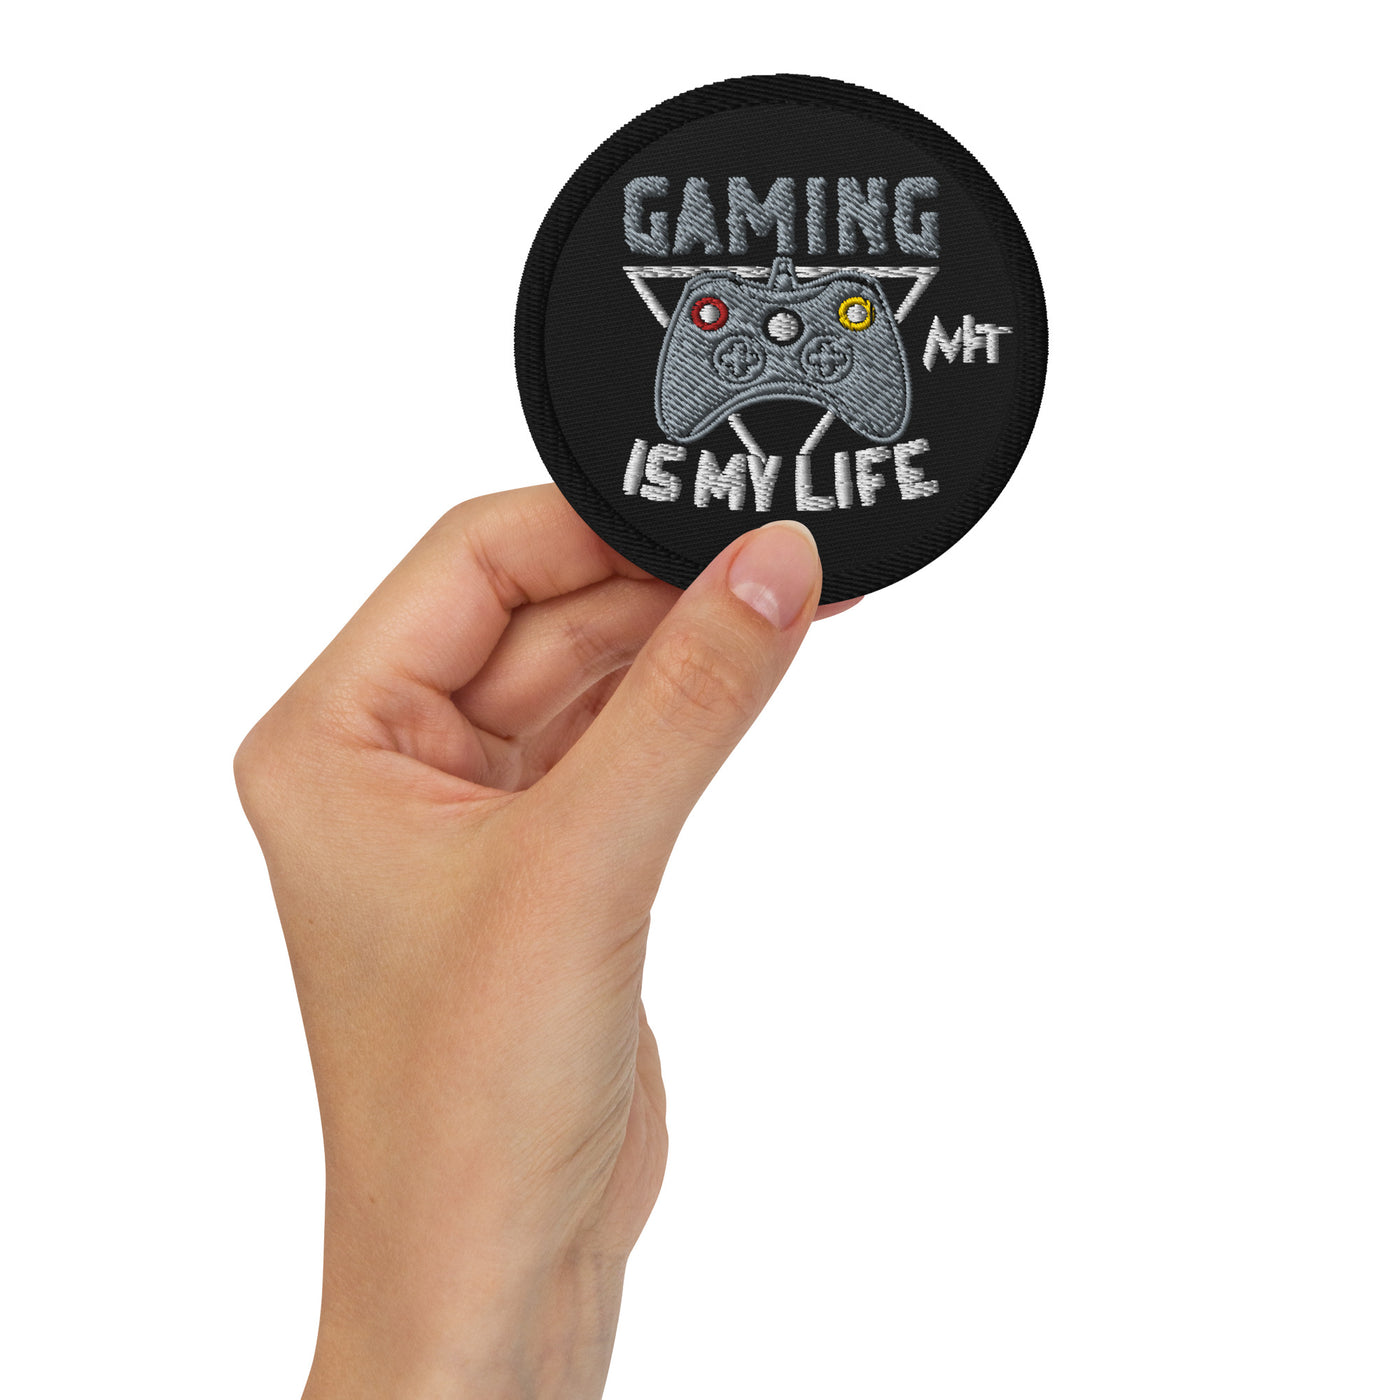 Gaming Is My Life - Embroidered patches